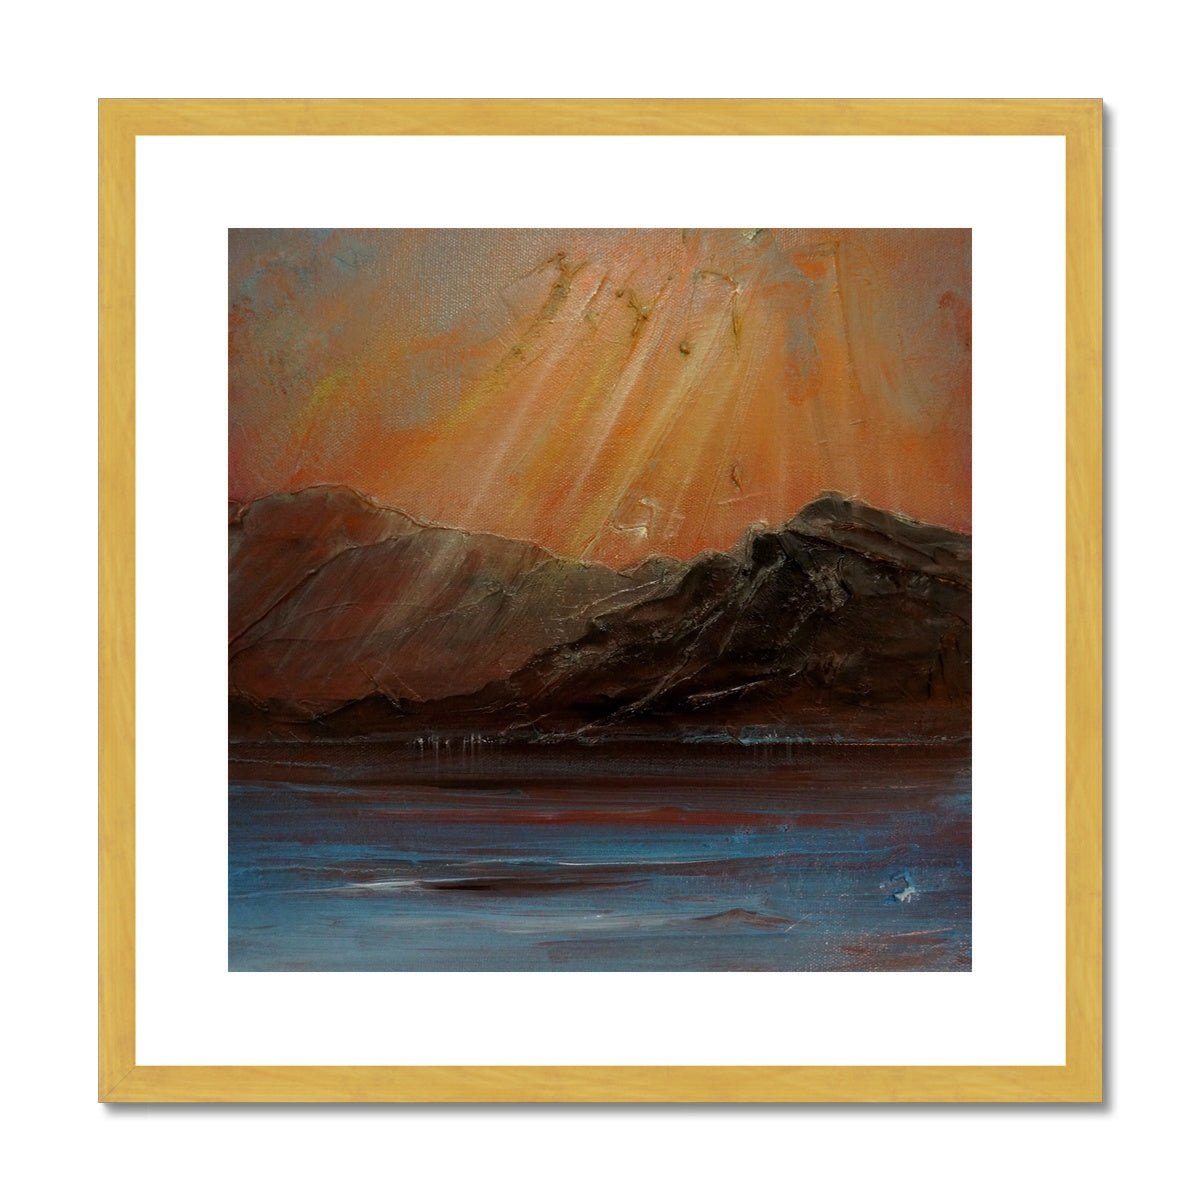 Torridon ii Painting | Antique Framed & Mounted Prints From Scotland-Antique Framed & Mounted Prints-Scottish Lochs & Mountains Art Gallery-20"x20"-Gold Frame-Paintings, Prints, Homeware, Art Gifts From Scotland By Scottish Artist Kevin Hunter